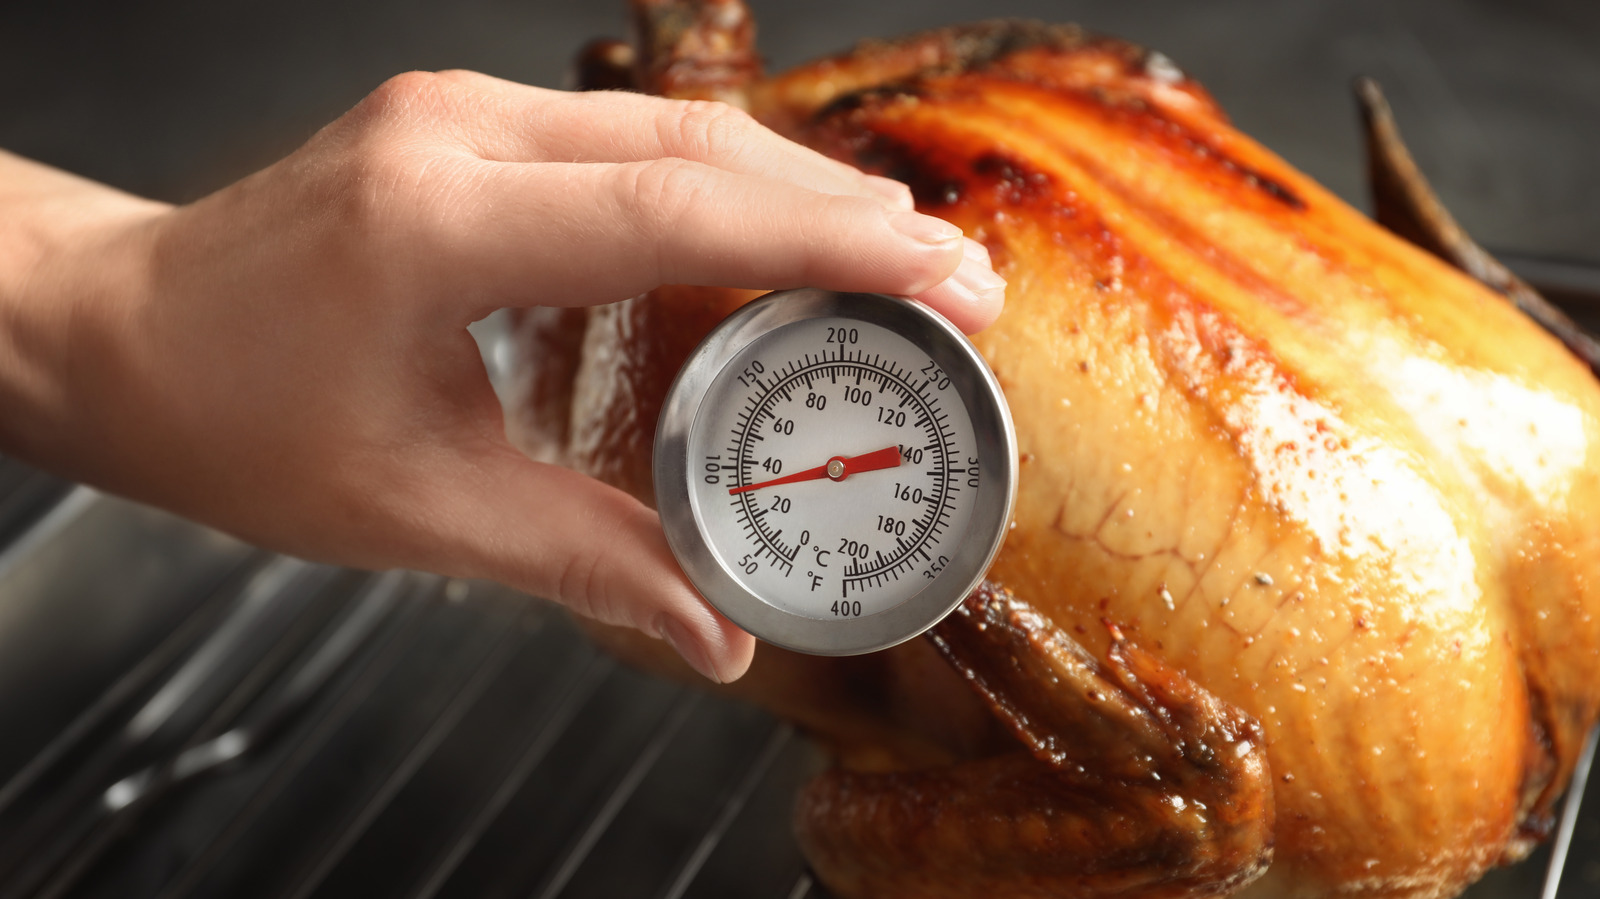 https://www.tastingtable.com/img/gallery/the-potential-health-risk-of-using-the-wrong-meat-thermometer/l-intro-1660957252.jpg